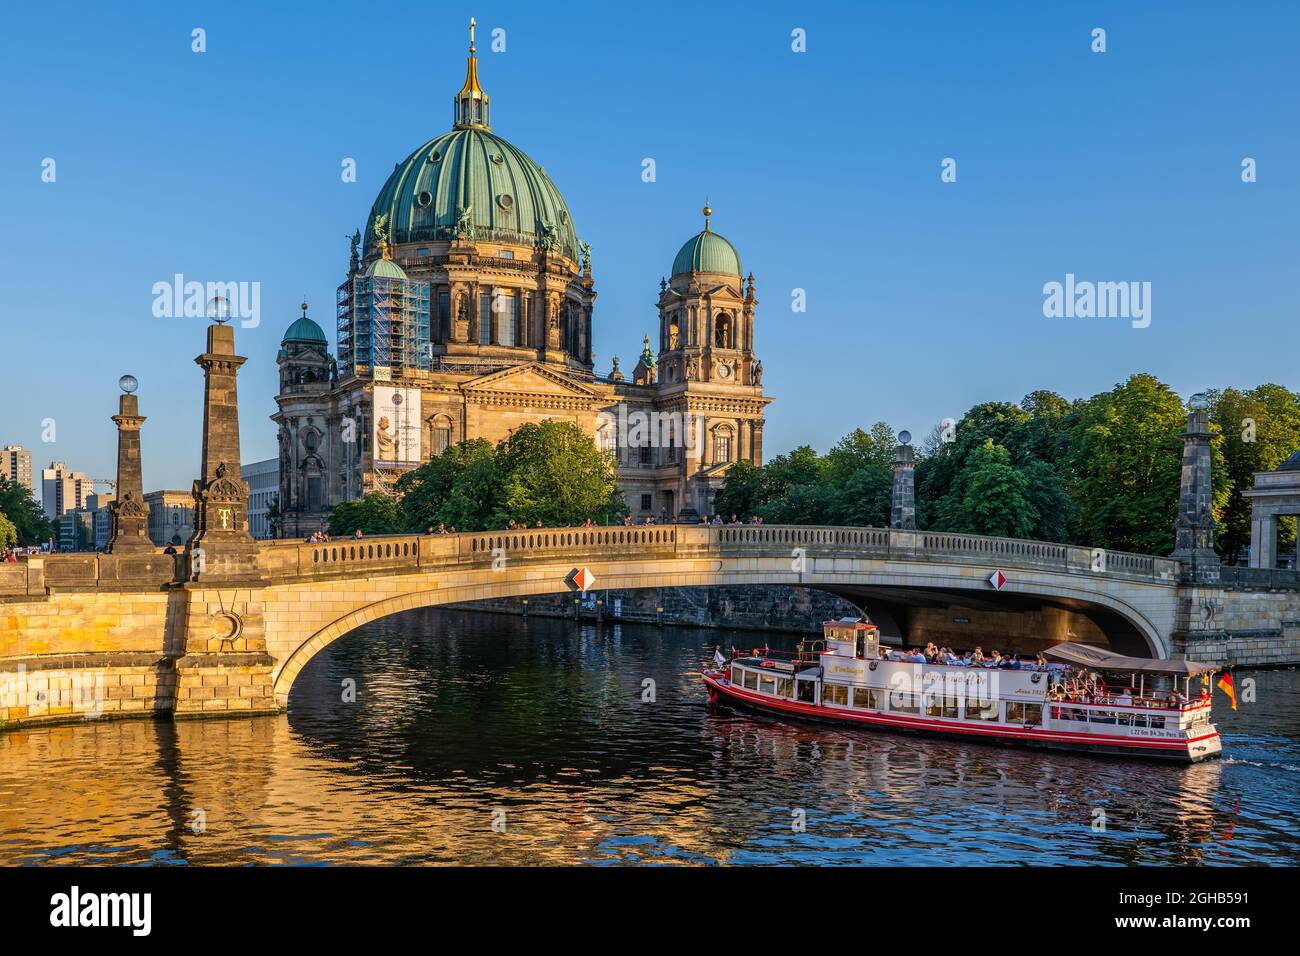 Berlin, Germany - July 30, 2021: Berlin Cathedral (Berliner Dom) and Friedrichs Bridge (Friedrichsbrucke) with tour boat on Spree river at sunset Stock Photo